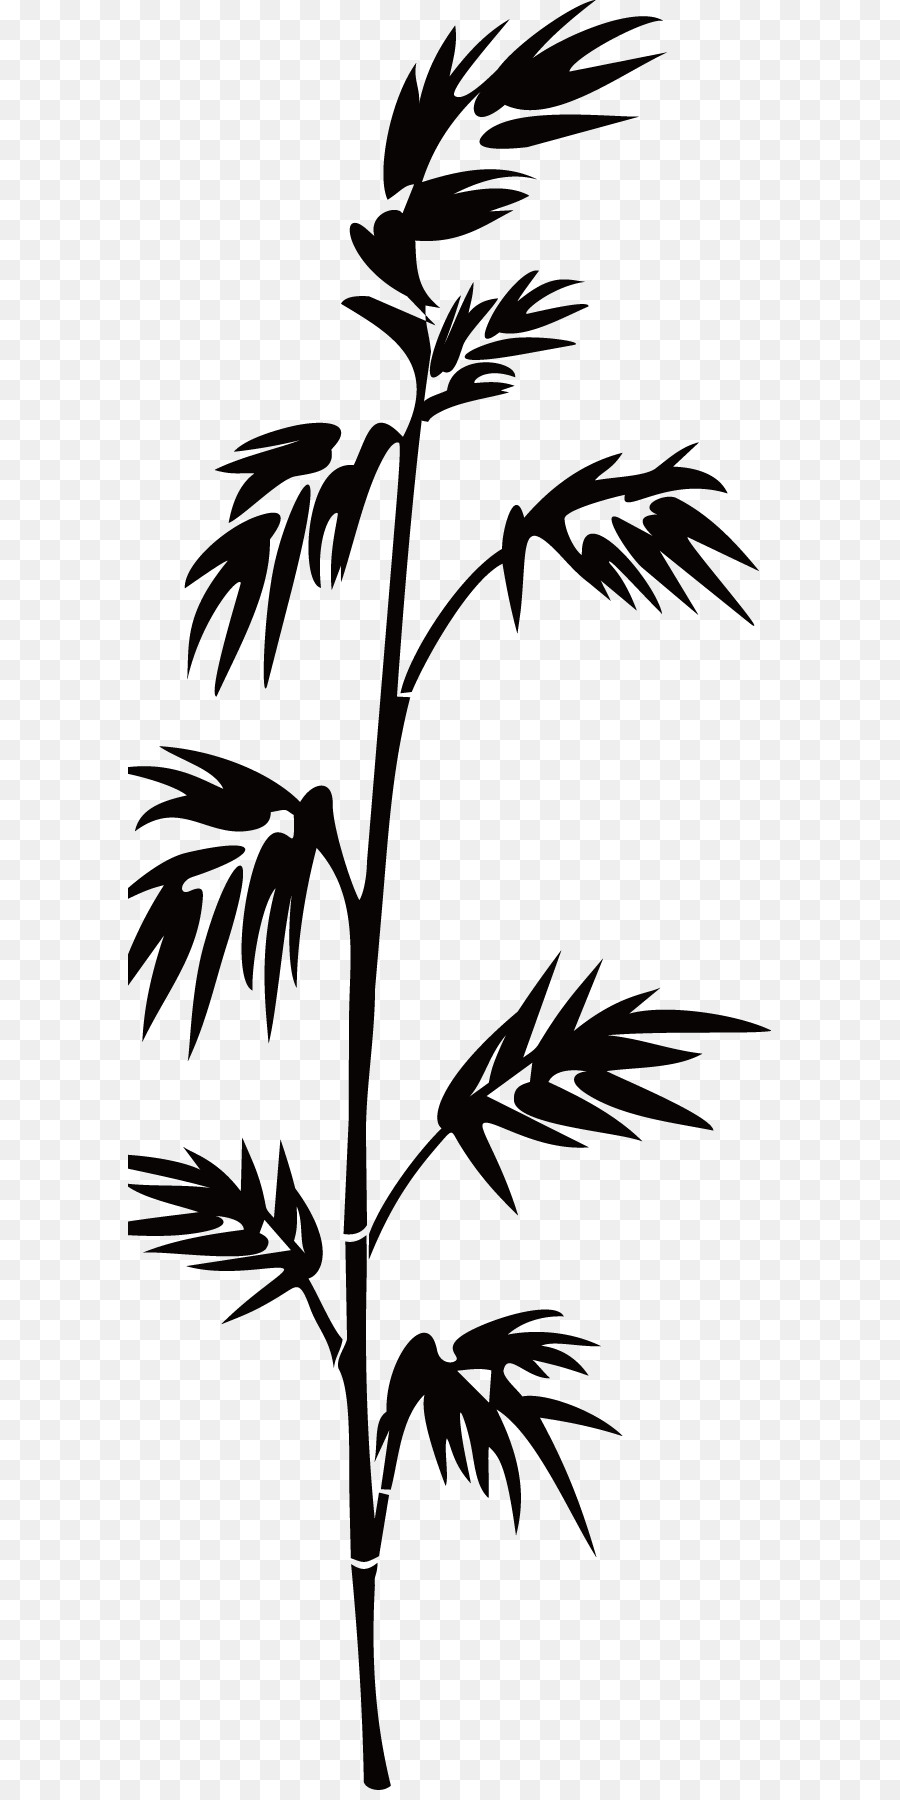 Bamboo Silhouette Bamboe - Black Bamboo Silhouette png download - 643*1790 - Free Transparent Bamboo png Download.